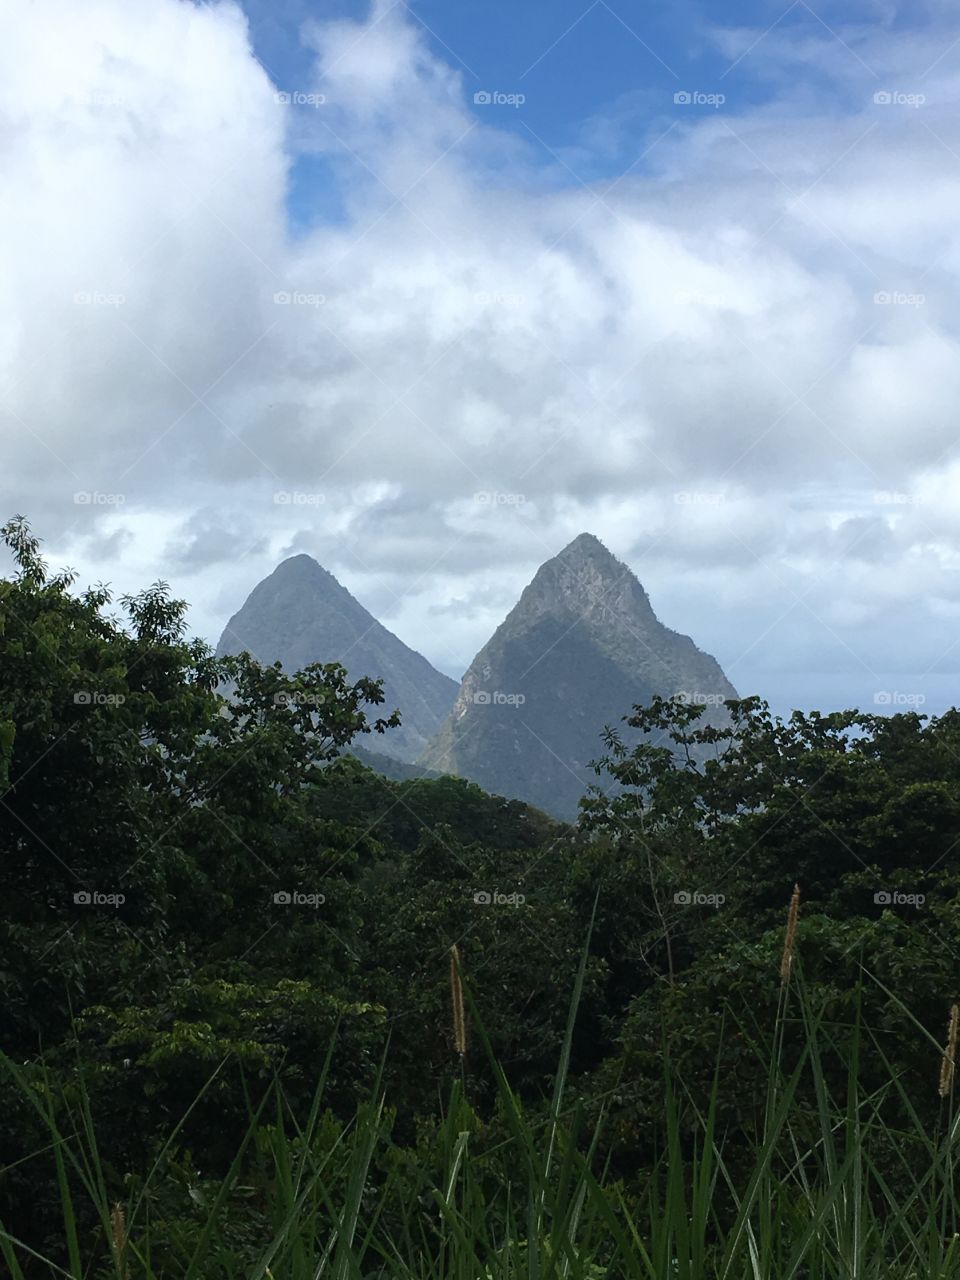 The Piton in St Lucia